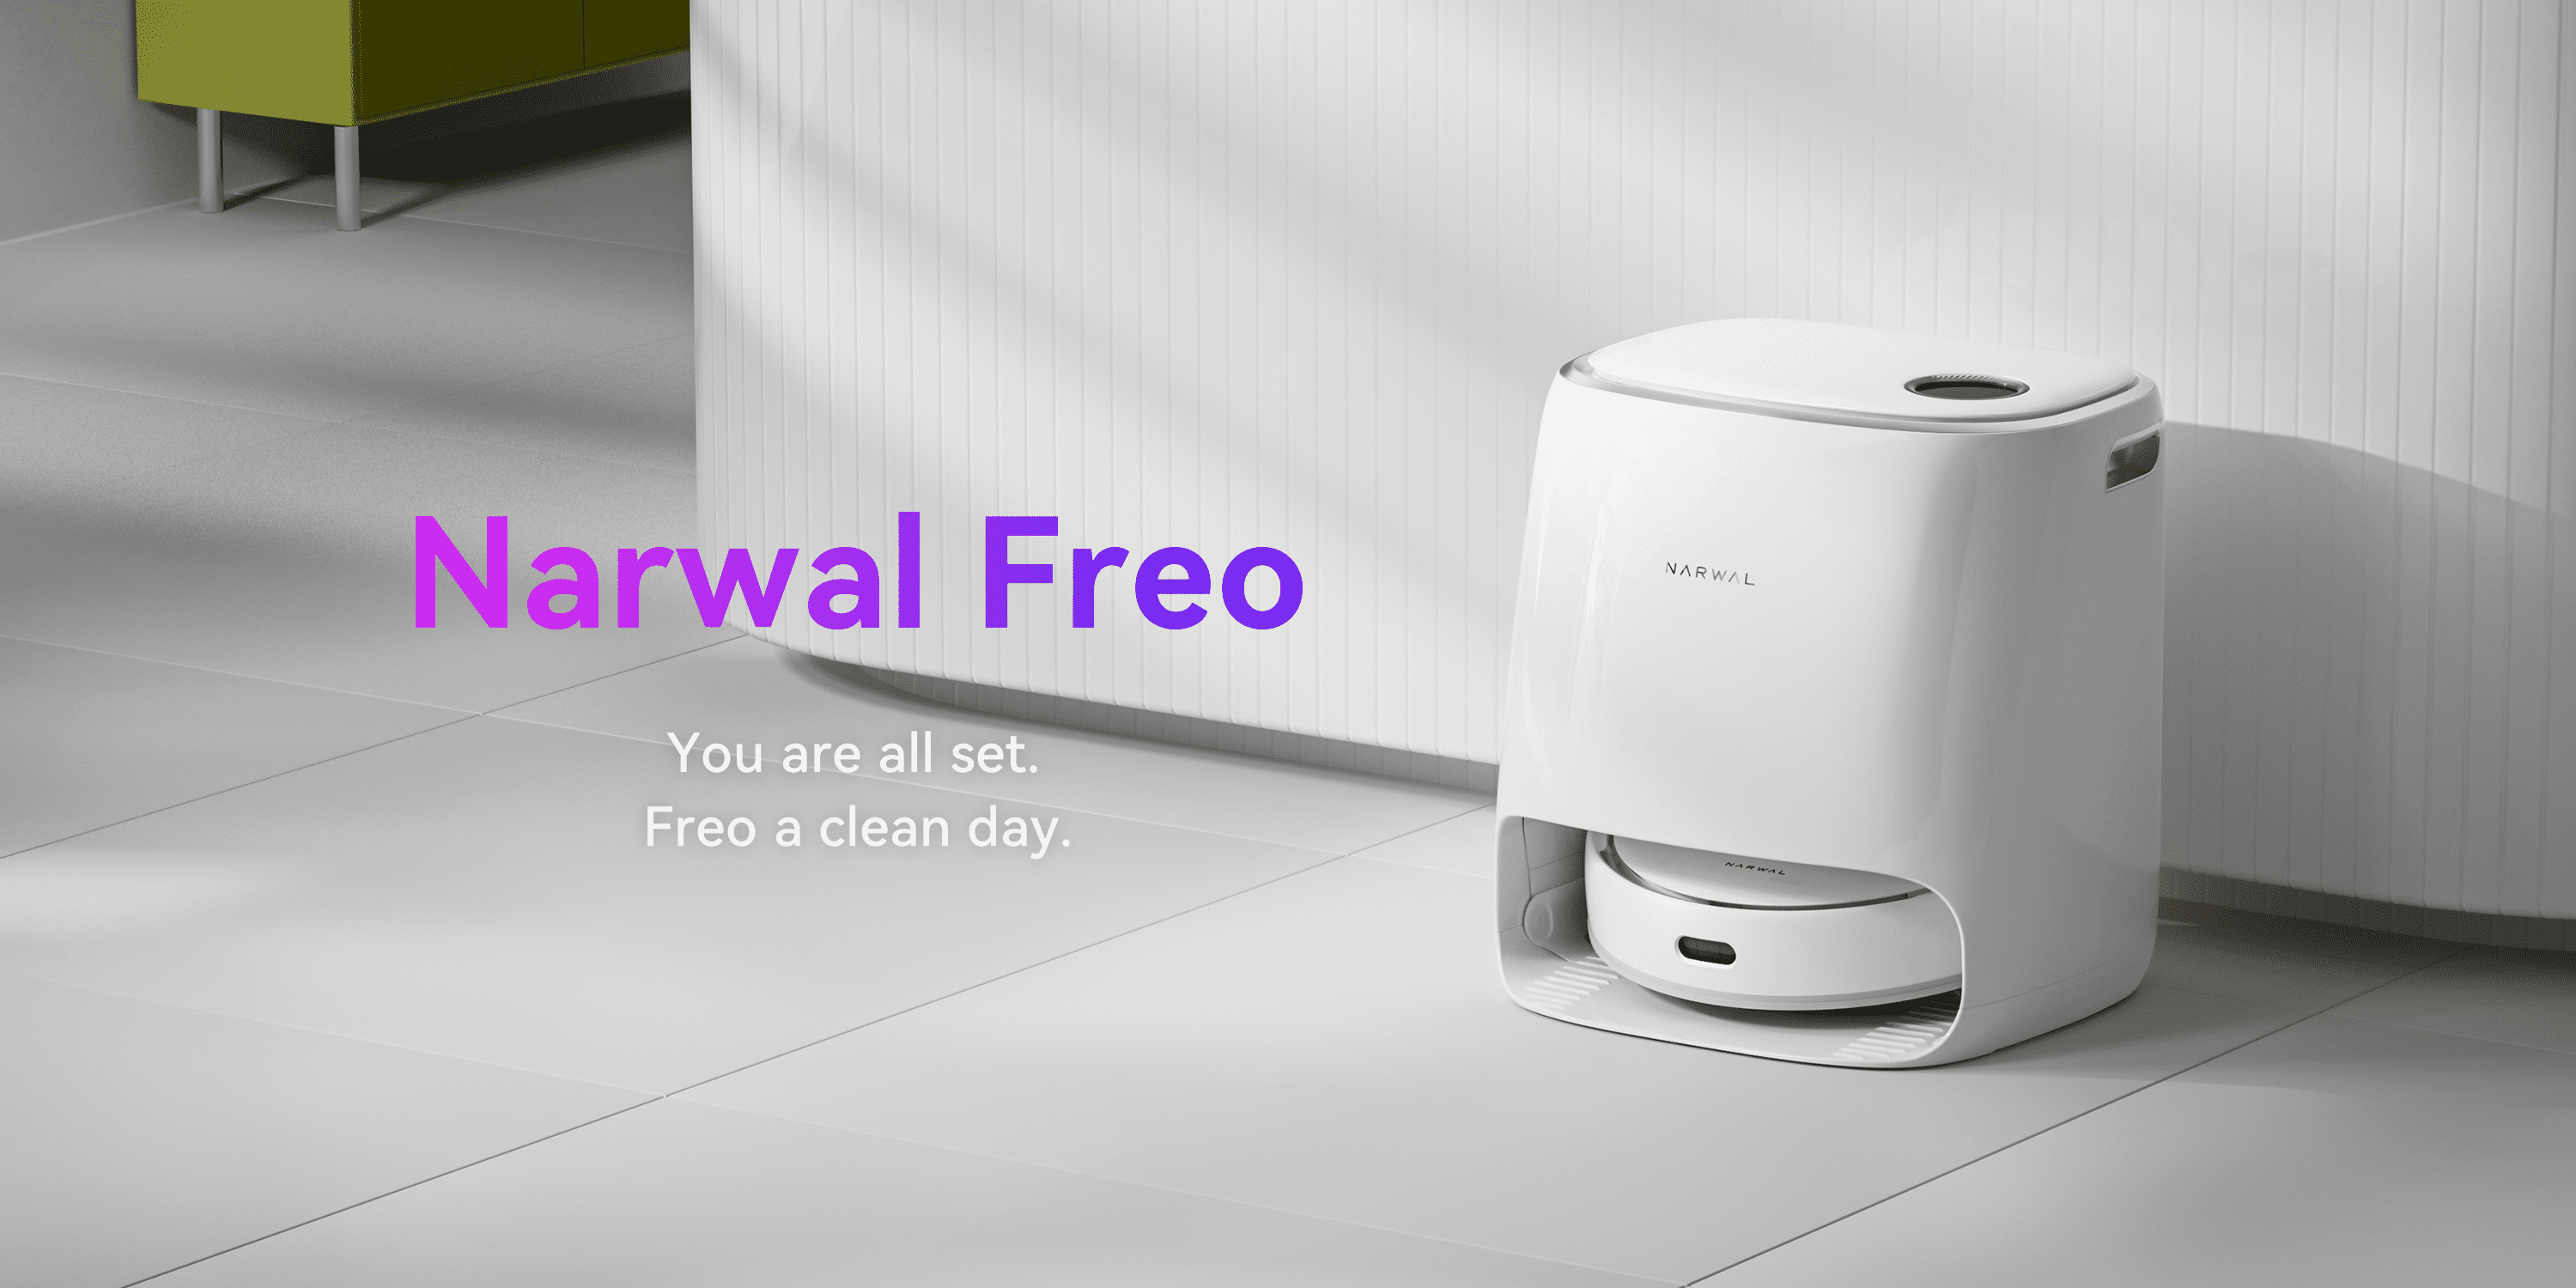 Narwal Freo vacuums and mops your home with smart features